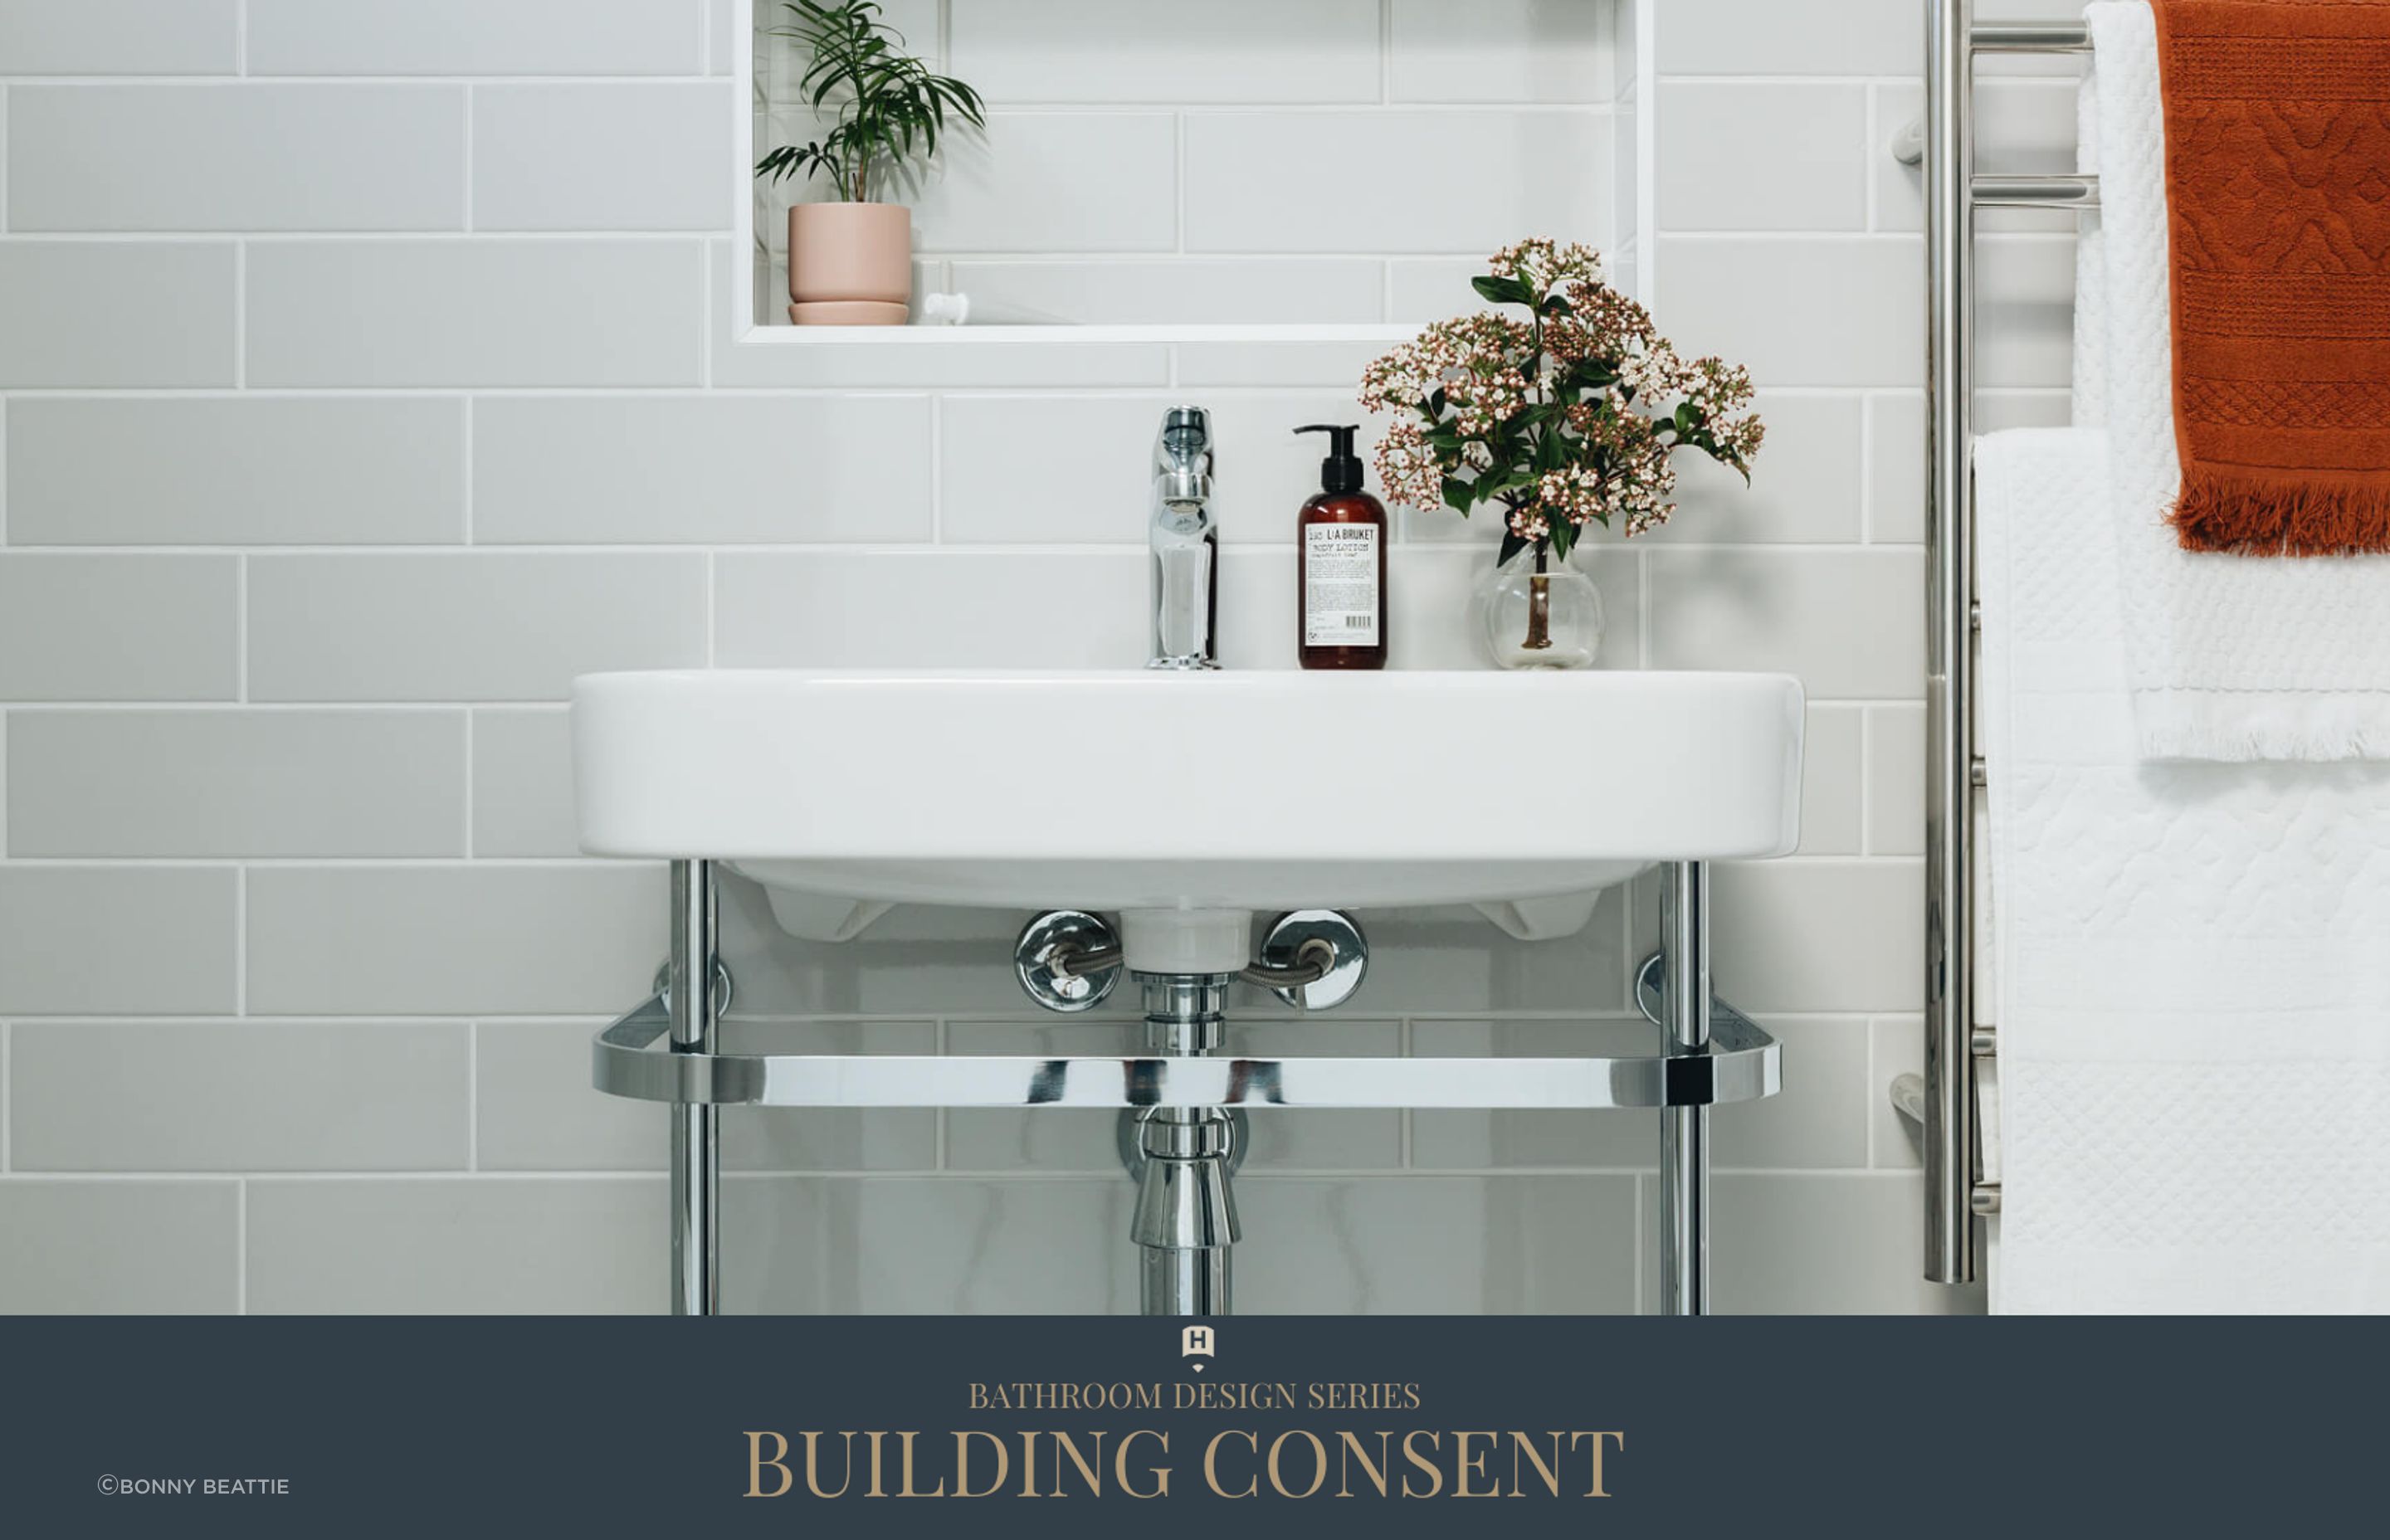 Things to Consider When Planning a Bathroom Renovation